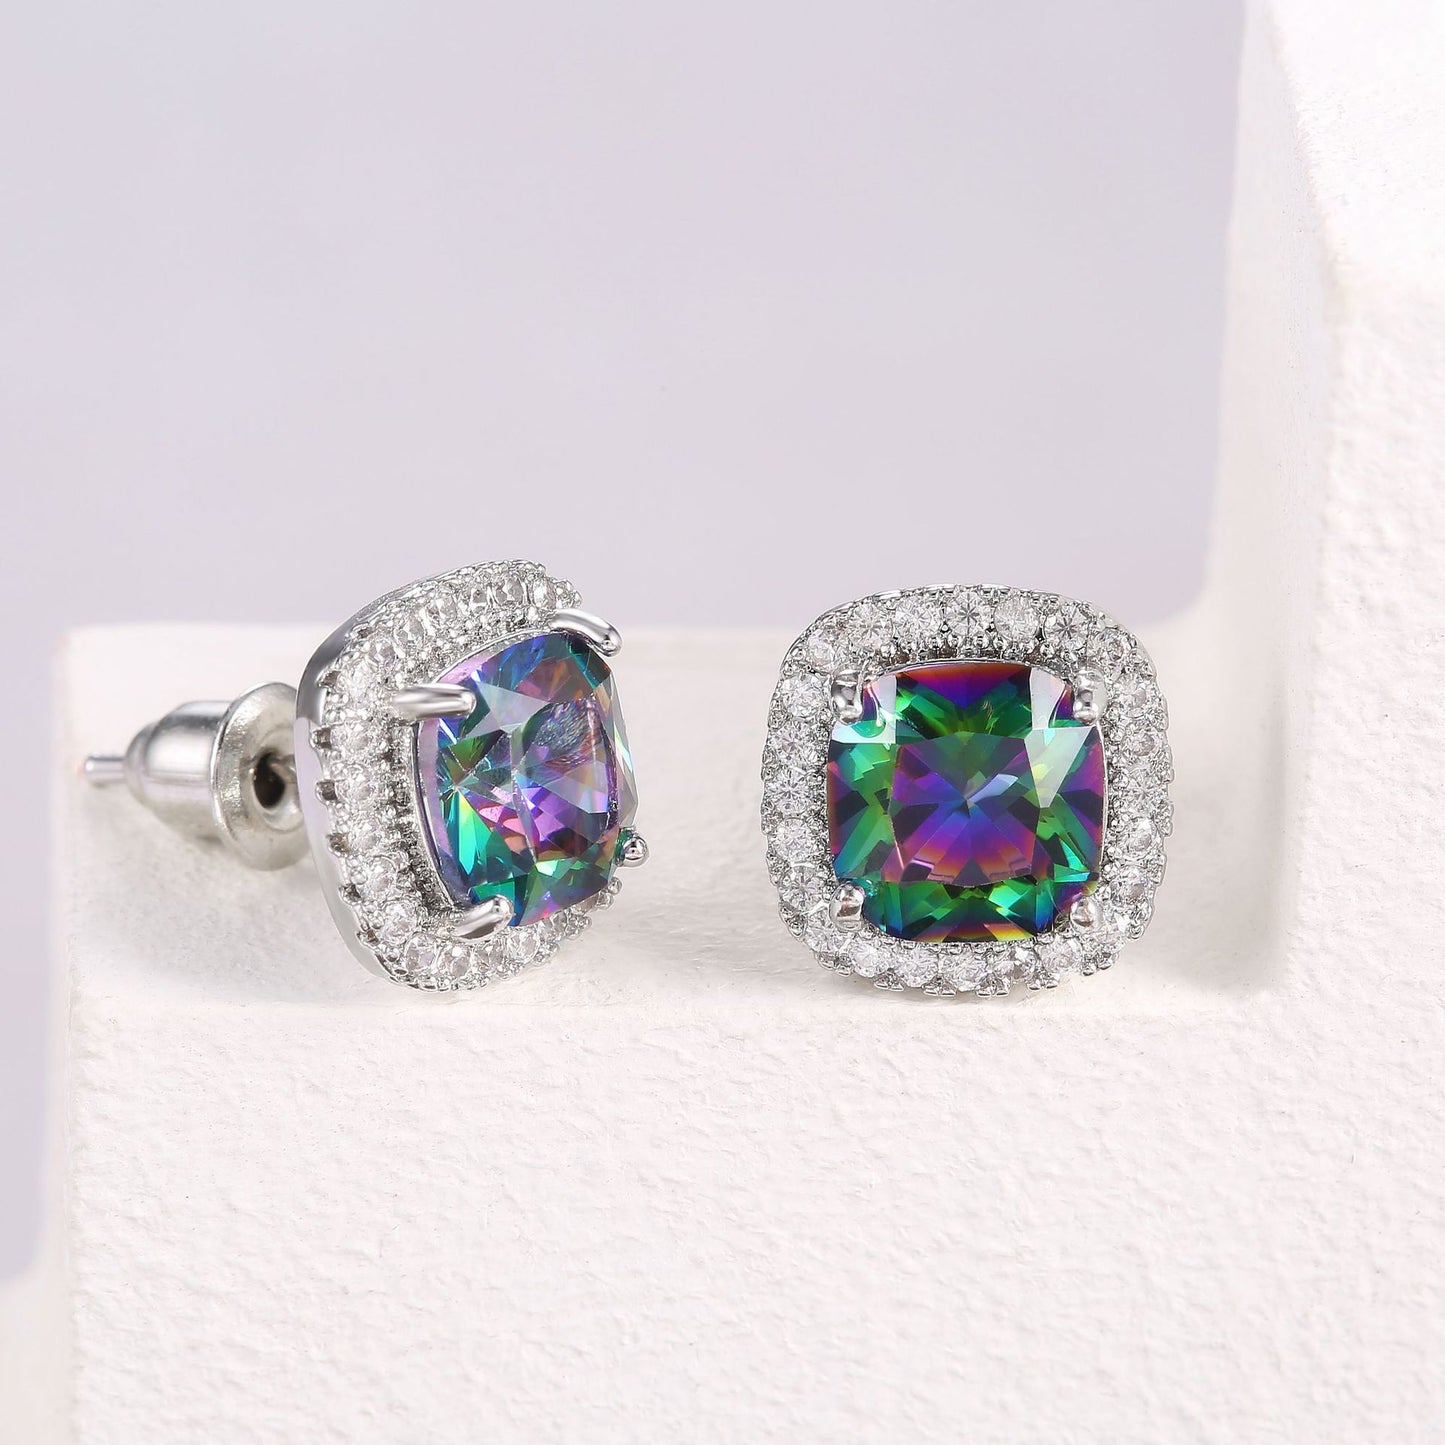 Square  Mystic Topaz  and  Cubic Zirconia   AAA  Post Back   Earrings